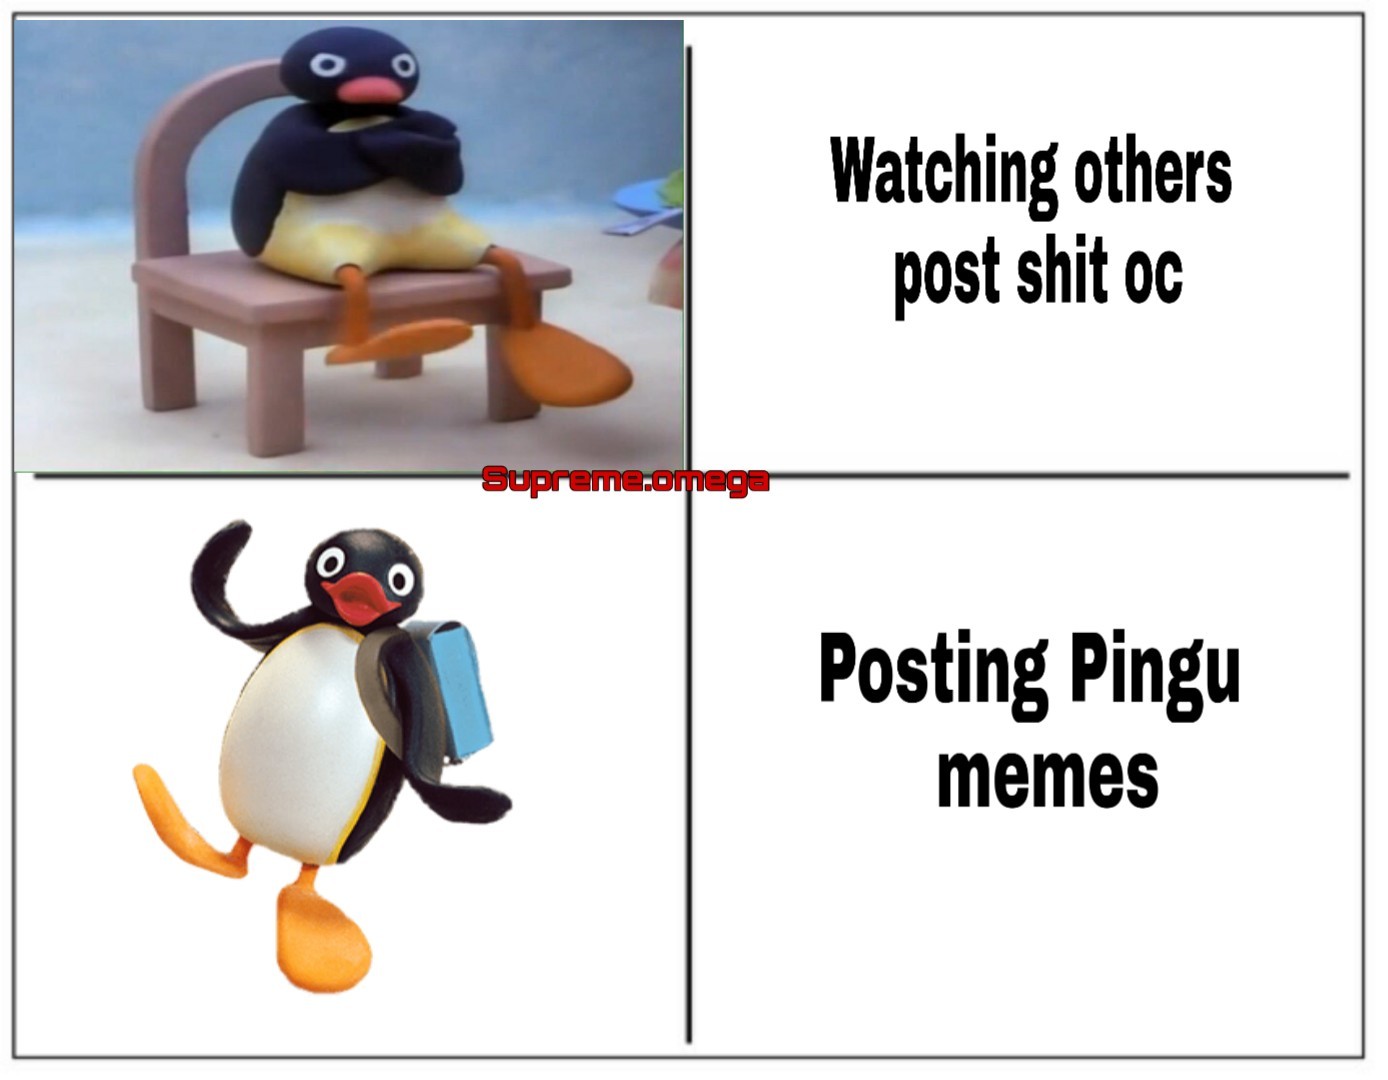 Most of the memes being posted today are shit. Here is some wholesome noots